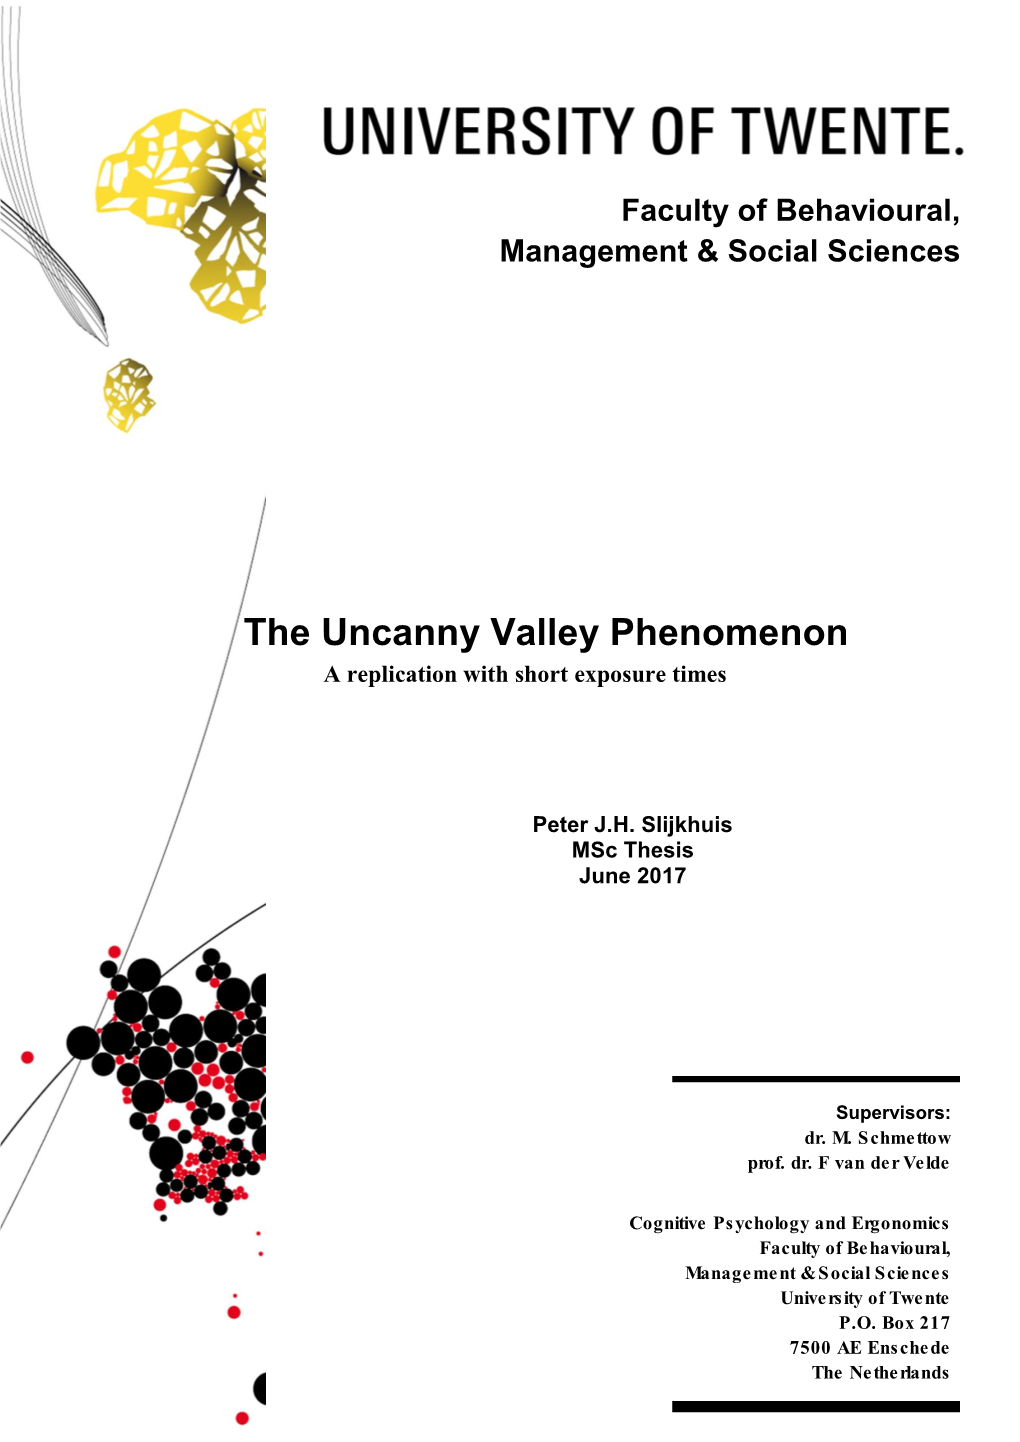 The Uncanny Valley Phenomenon a Replication with Short Exposure Times